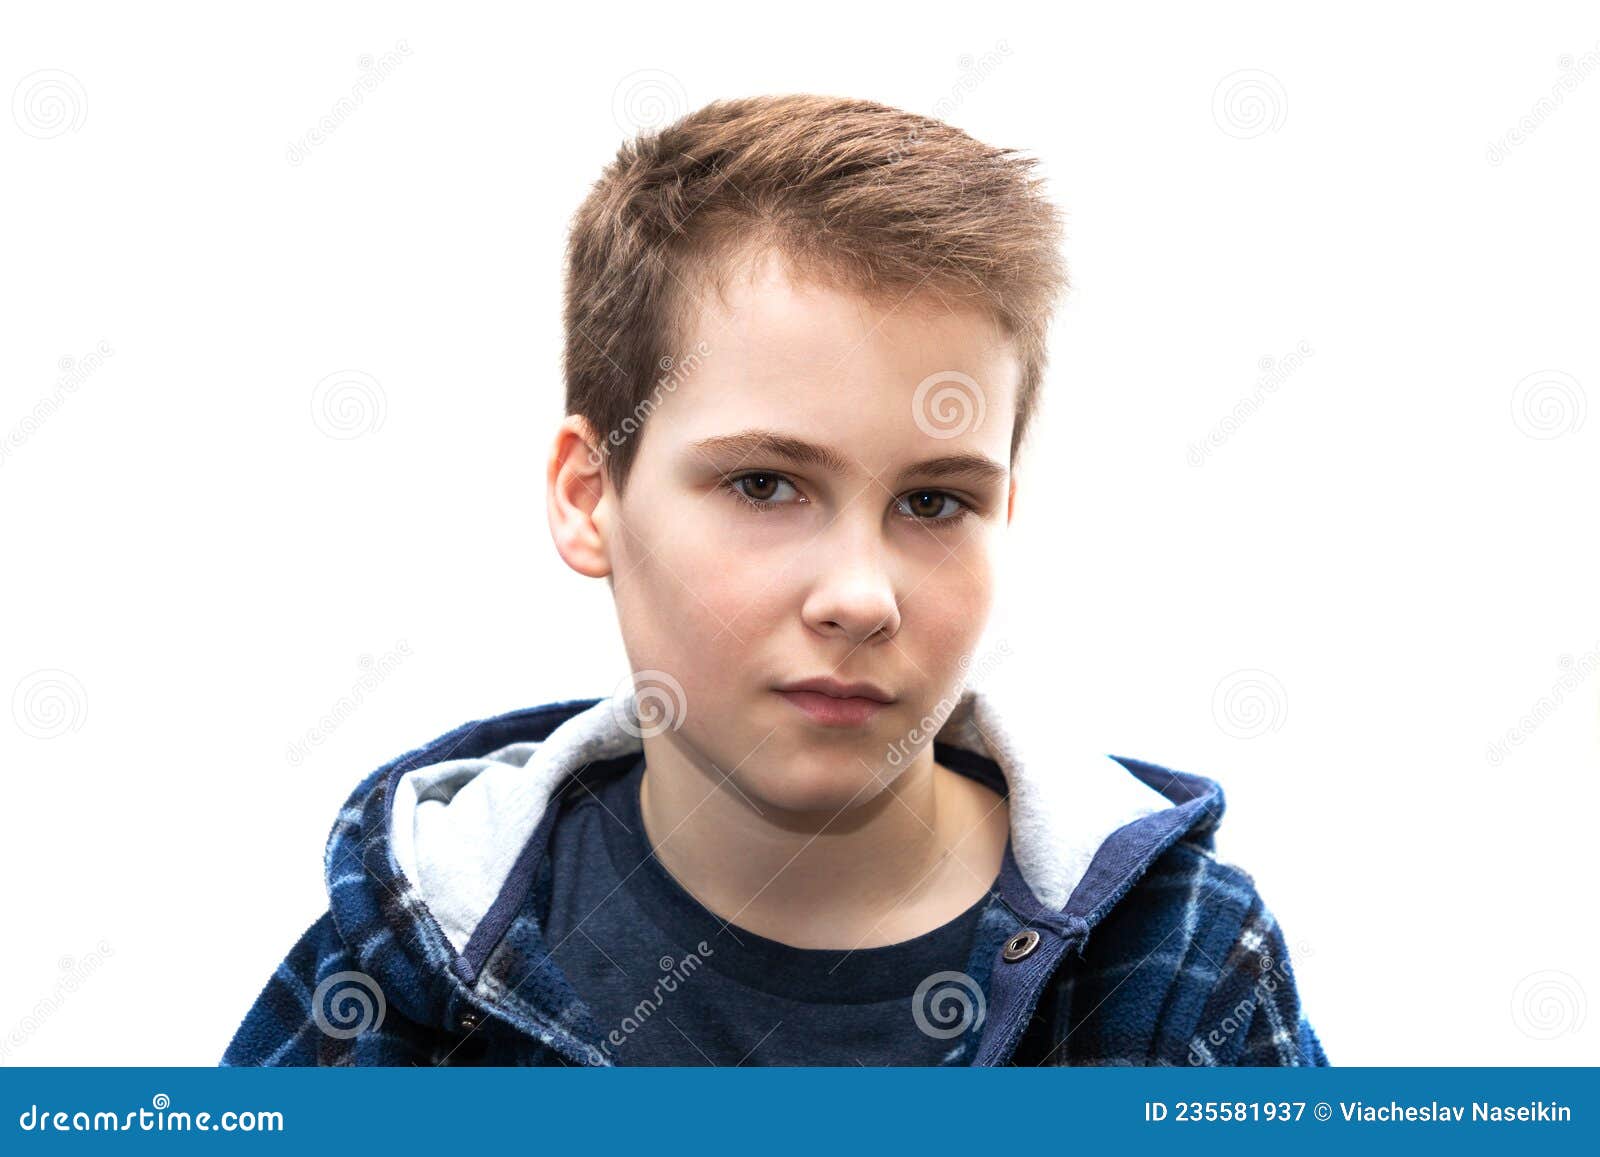 Head and Shoulders Portrait of a Young 11 Year Old Boy with Brown Eyes and Dark  Hair in a Good Mood with a Smile Stock Image - Image of laughing, clothing:  235581937